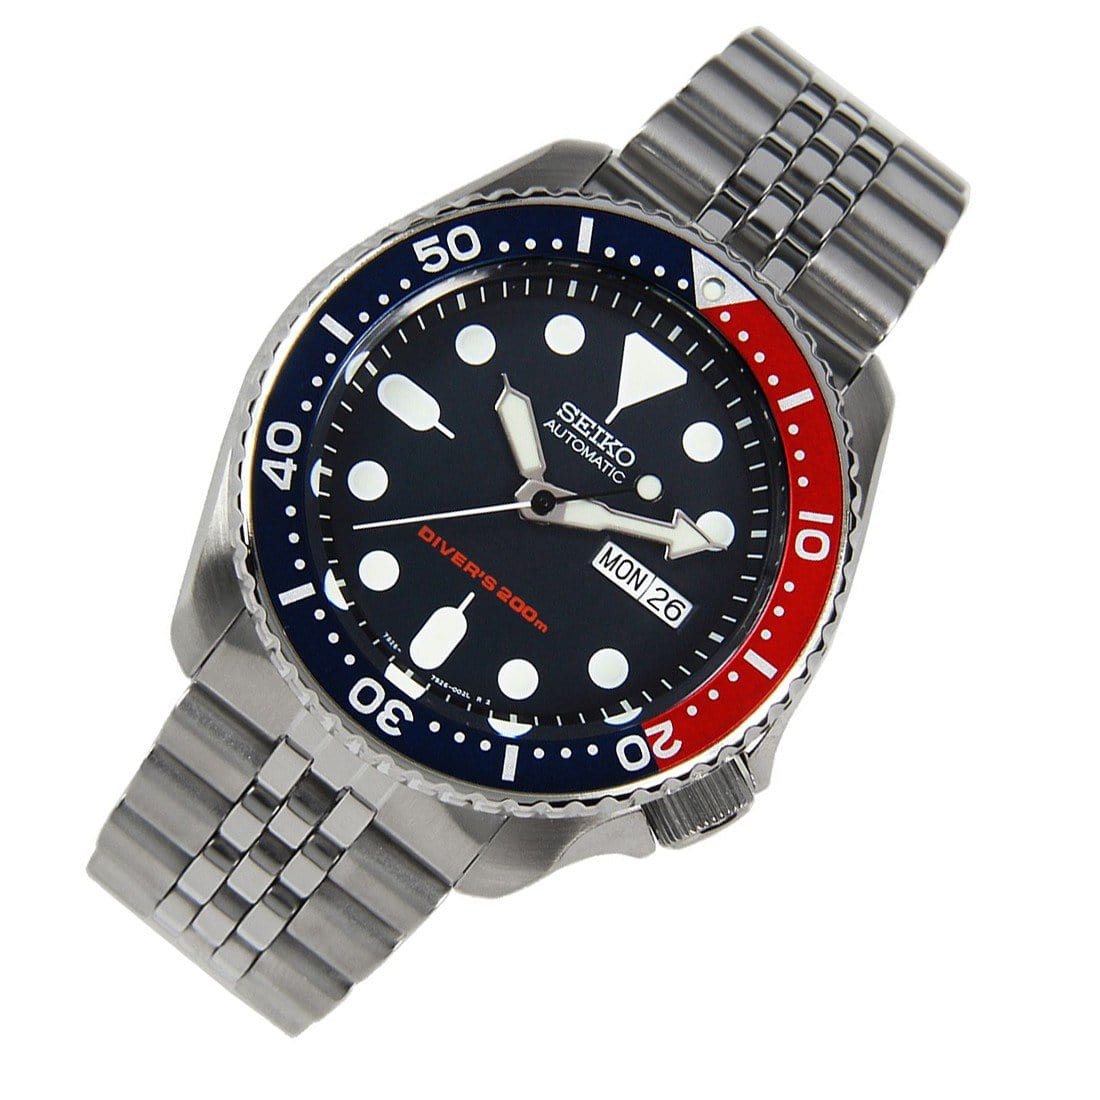 SKX009K2 SKX009 Seiko Automatic Analog Male Divers Watch with Extra Strap